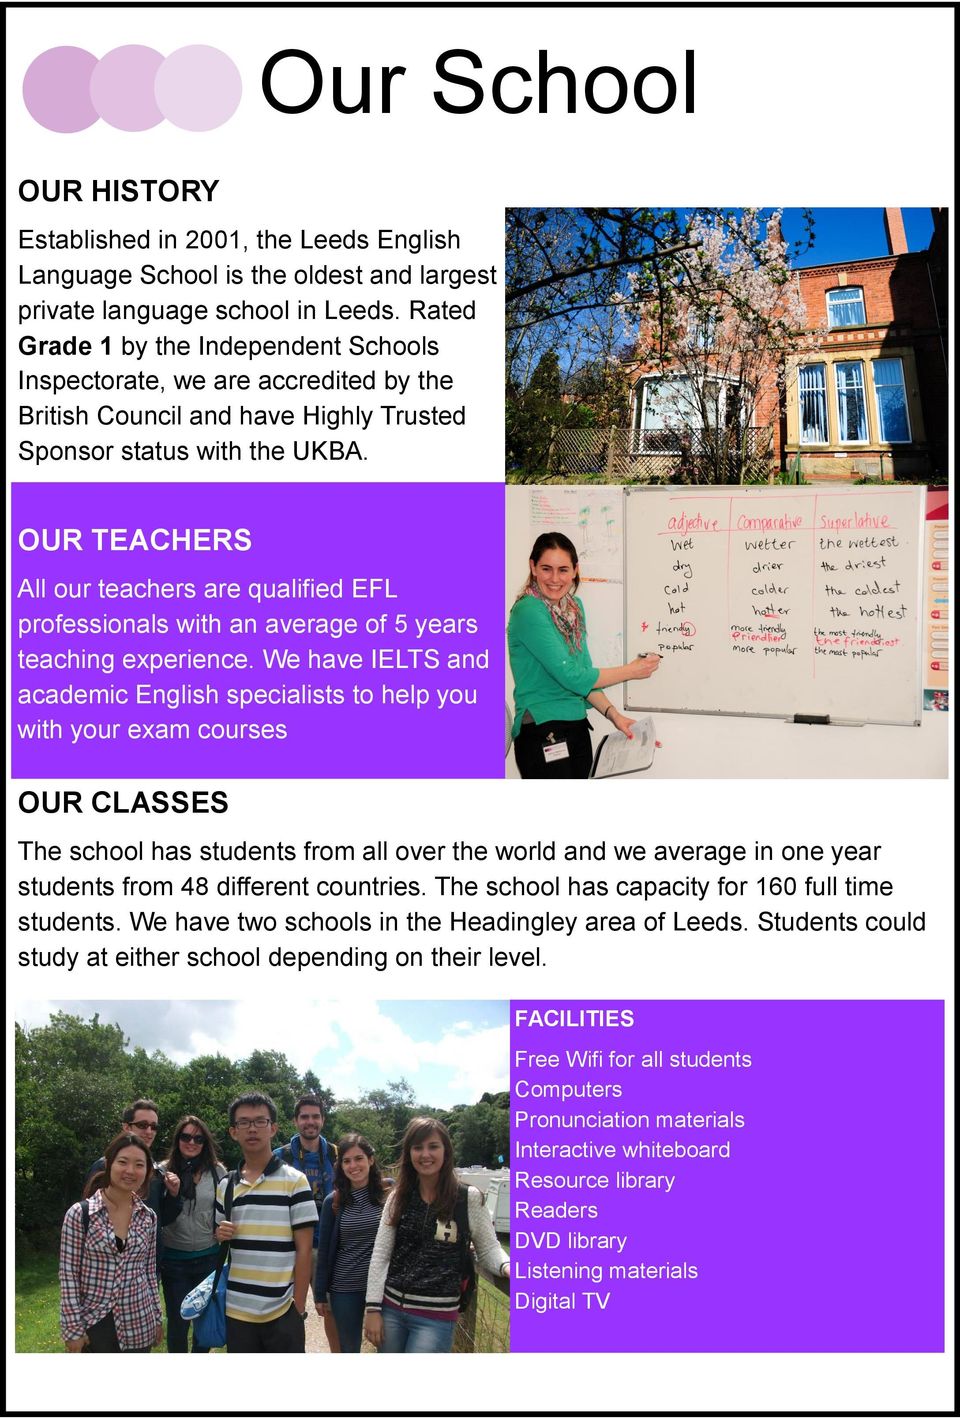 OUR TEACHERS All our teachers are qualified EFL professionals with an average of 5 years teaching experience.